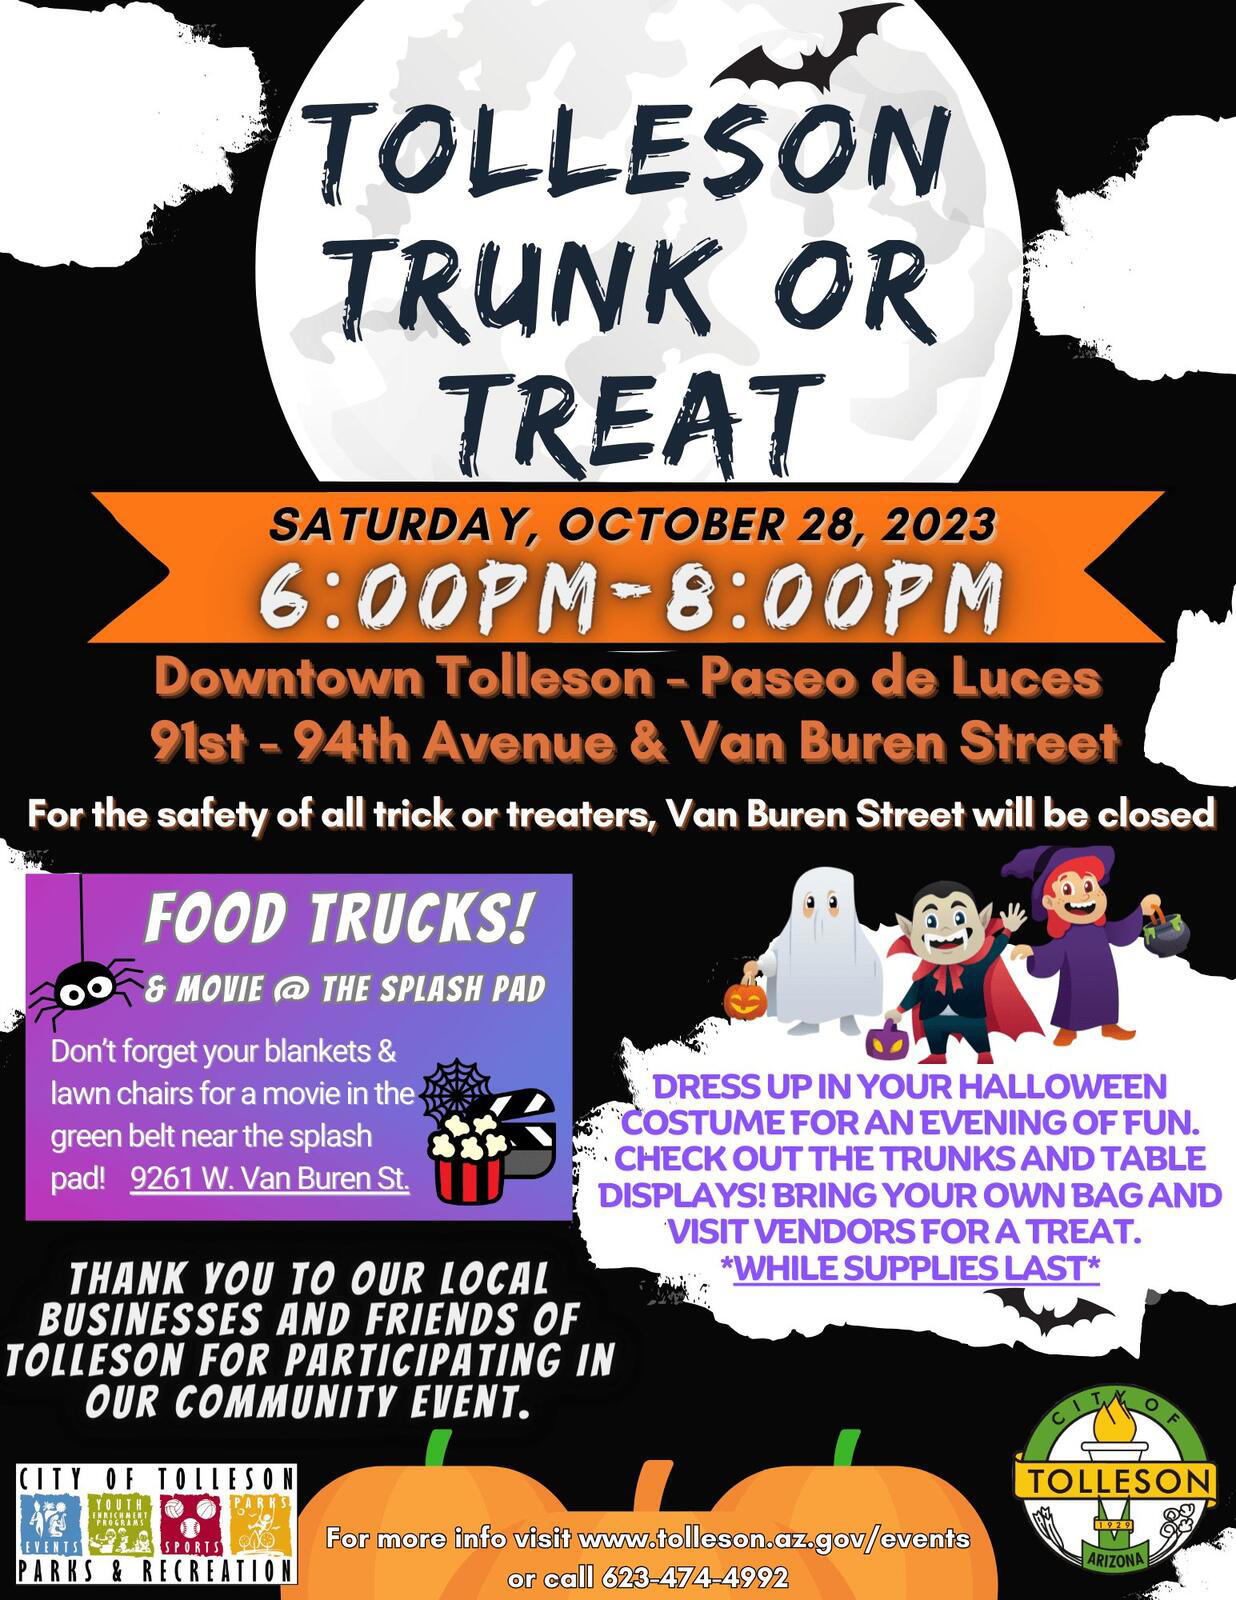 Tolleson Trunk or Treat this Saturday! Ryland At Heritage Point